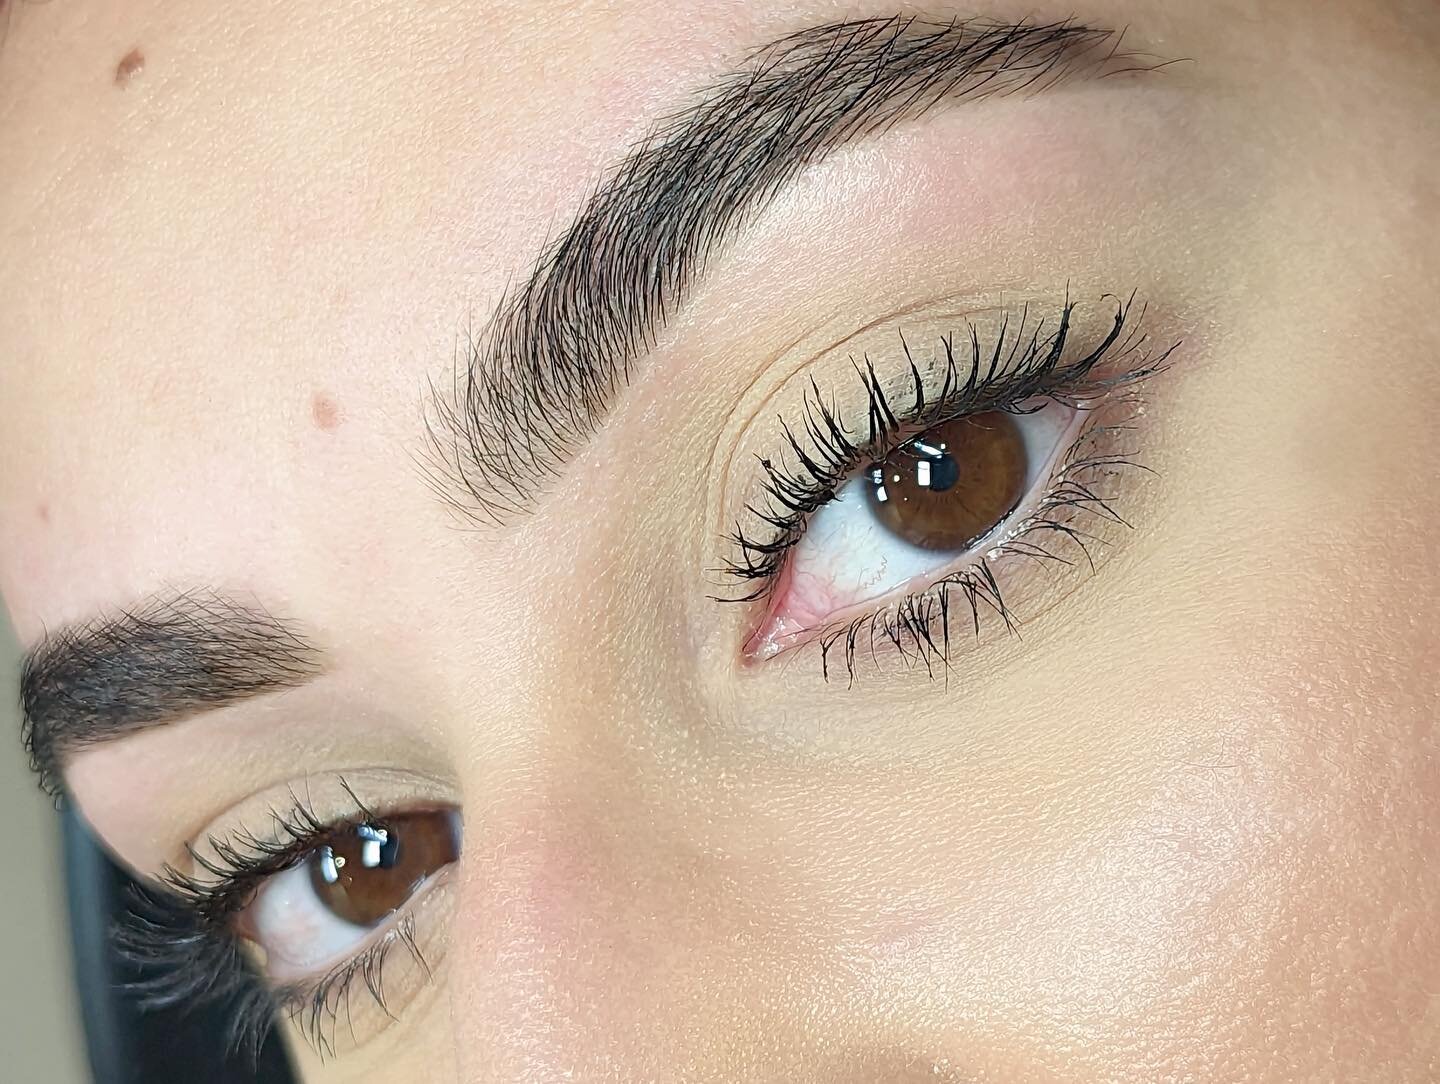 Eyebrow styling and tinting on natural brows ✨ 

.
.
.
.
.
#brows #eyebrows #lashes #browshaping #browsonfleek #browobsessed #hellobrows #browsonpoint #browenvy #beautytips #browqueen #browart #anastasiabeverlyhills #dreambrows #fleekybrows #eyebrowm